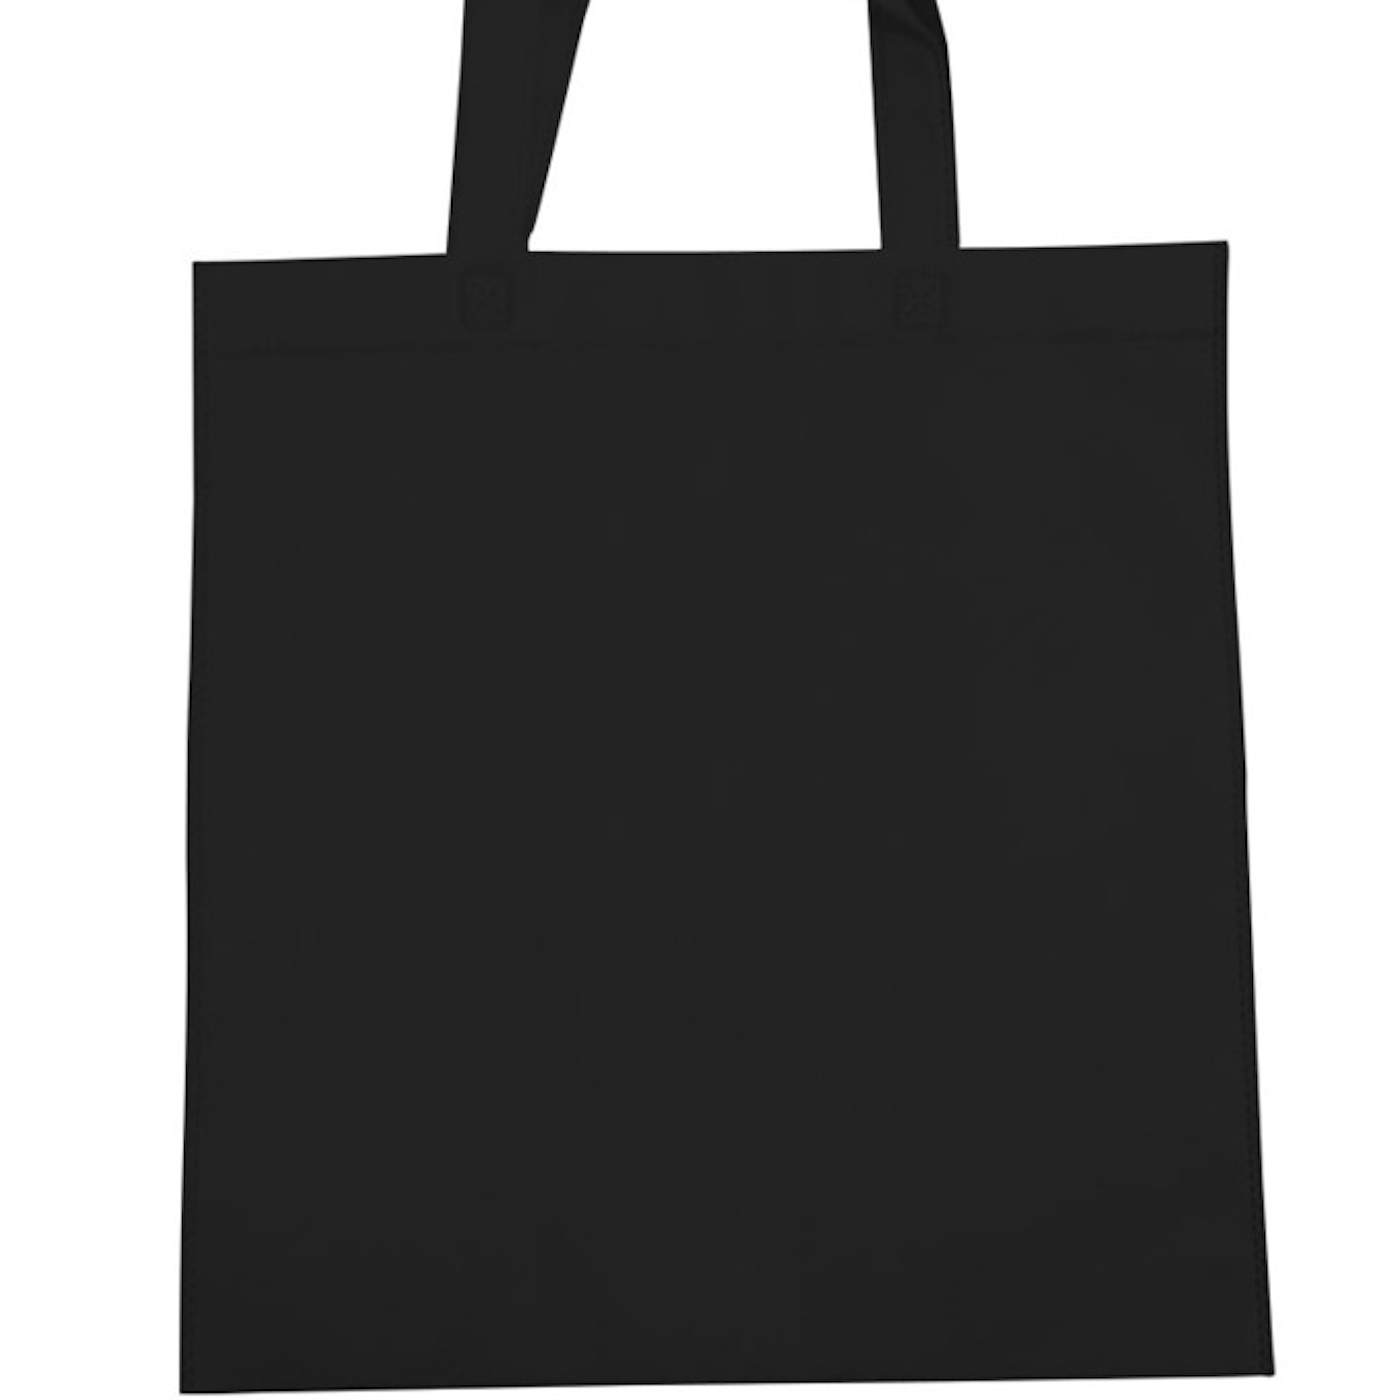 Gryffin Tote